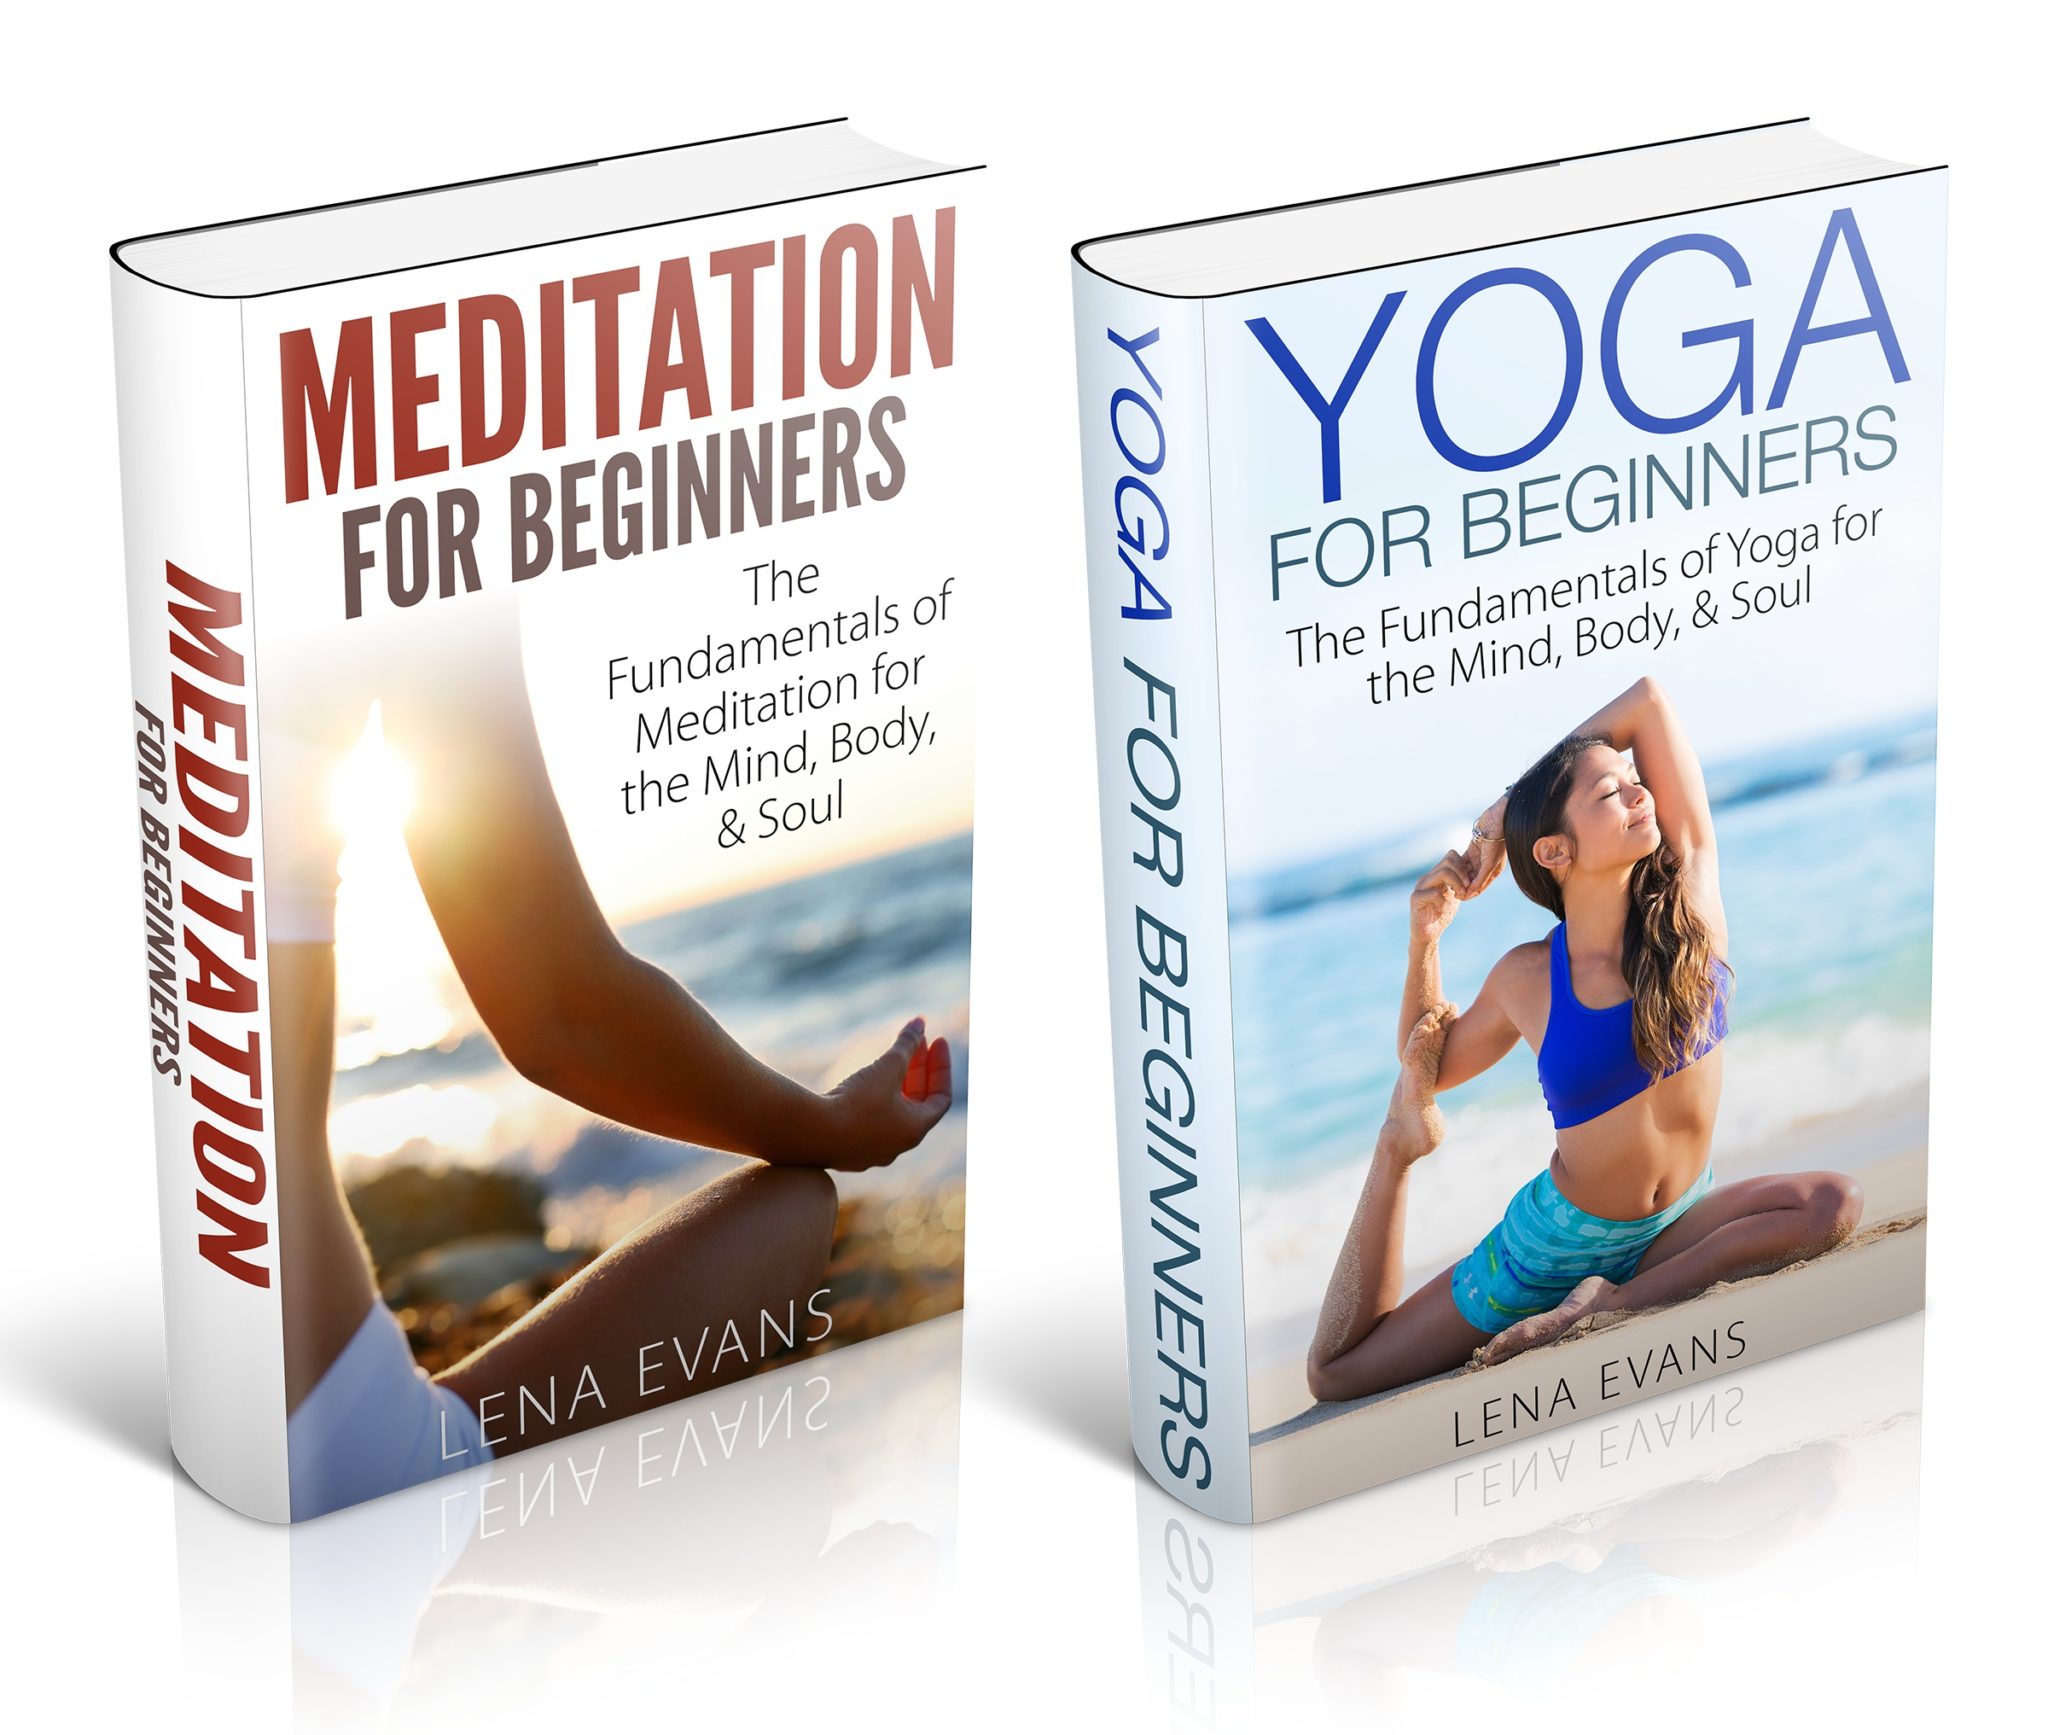 FREE: Yoga & Meditation Box Set for Beginners: The Fundamentals of Yoga and Meditation for the Mind, Body, & Soul by Lena Evans